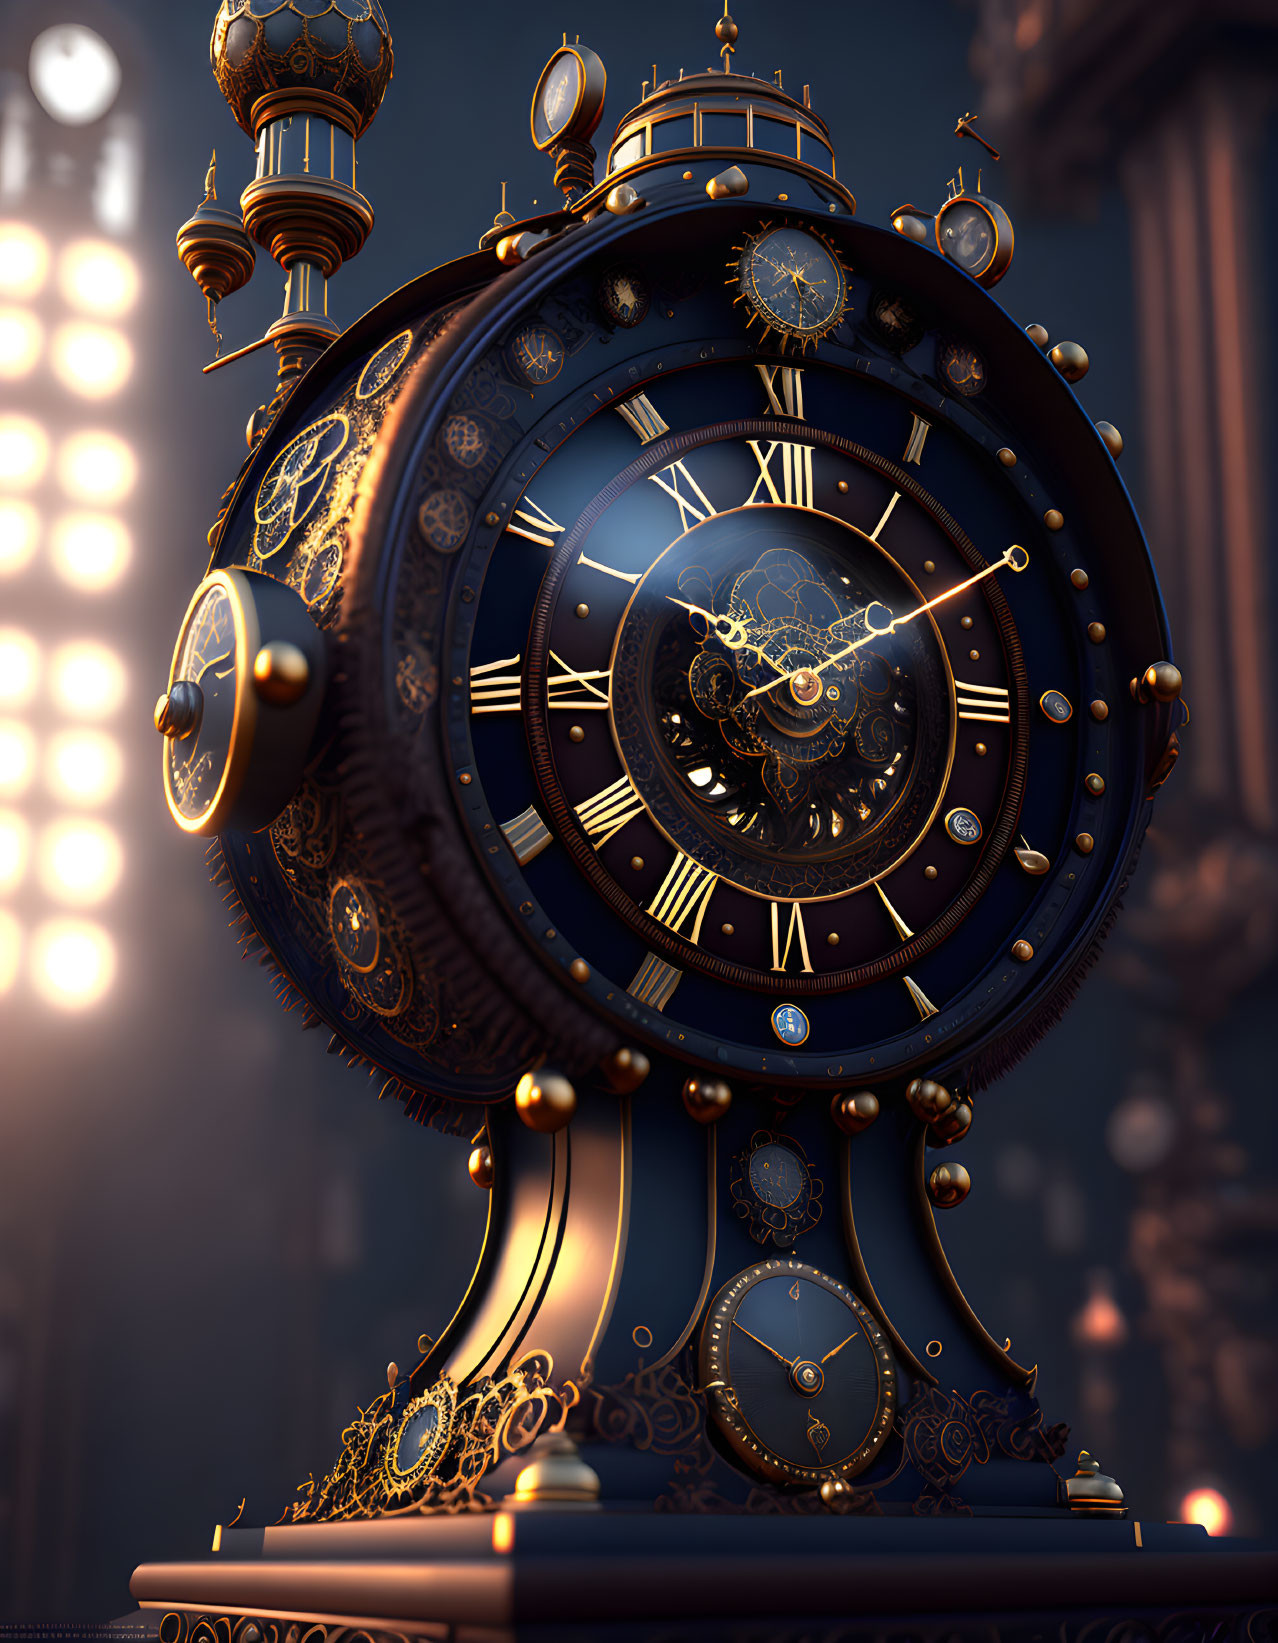 Steampunk-style clock with intricate gears and golden embellishments.